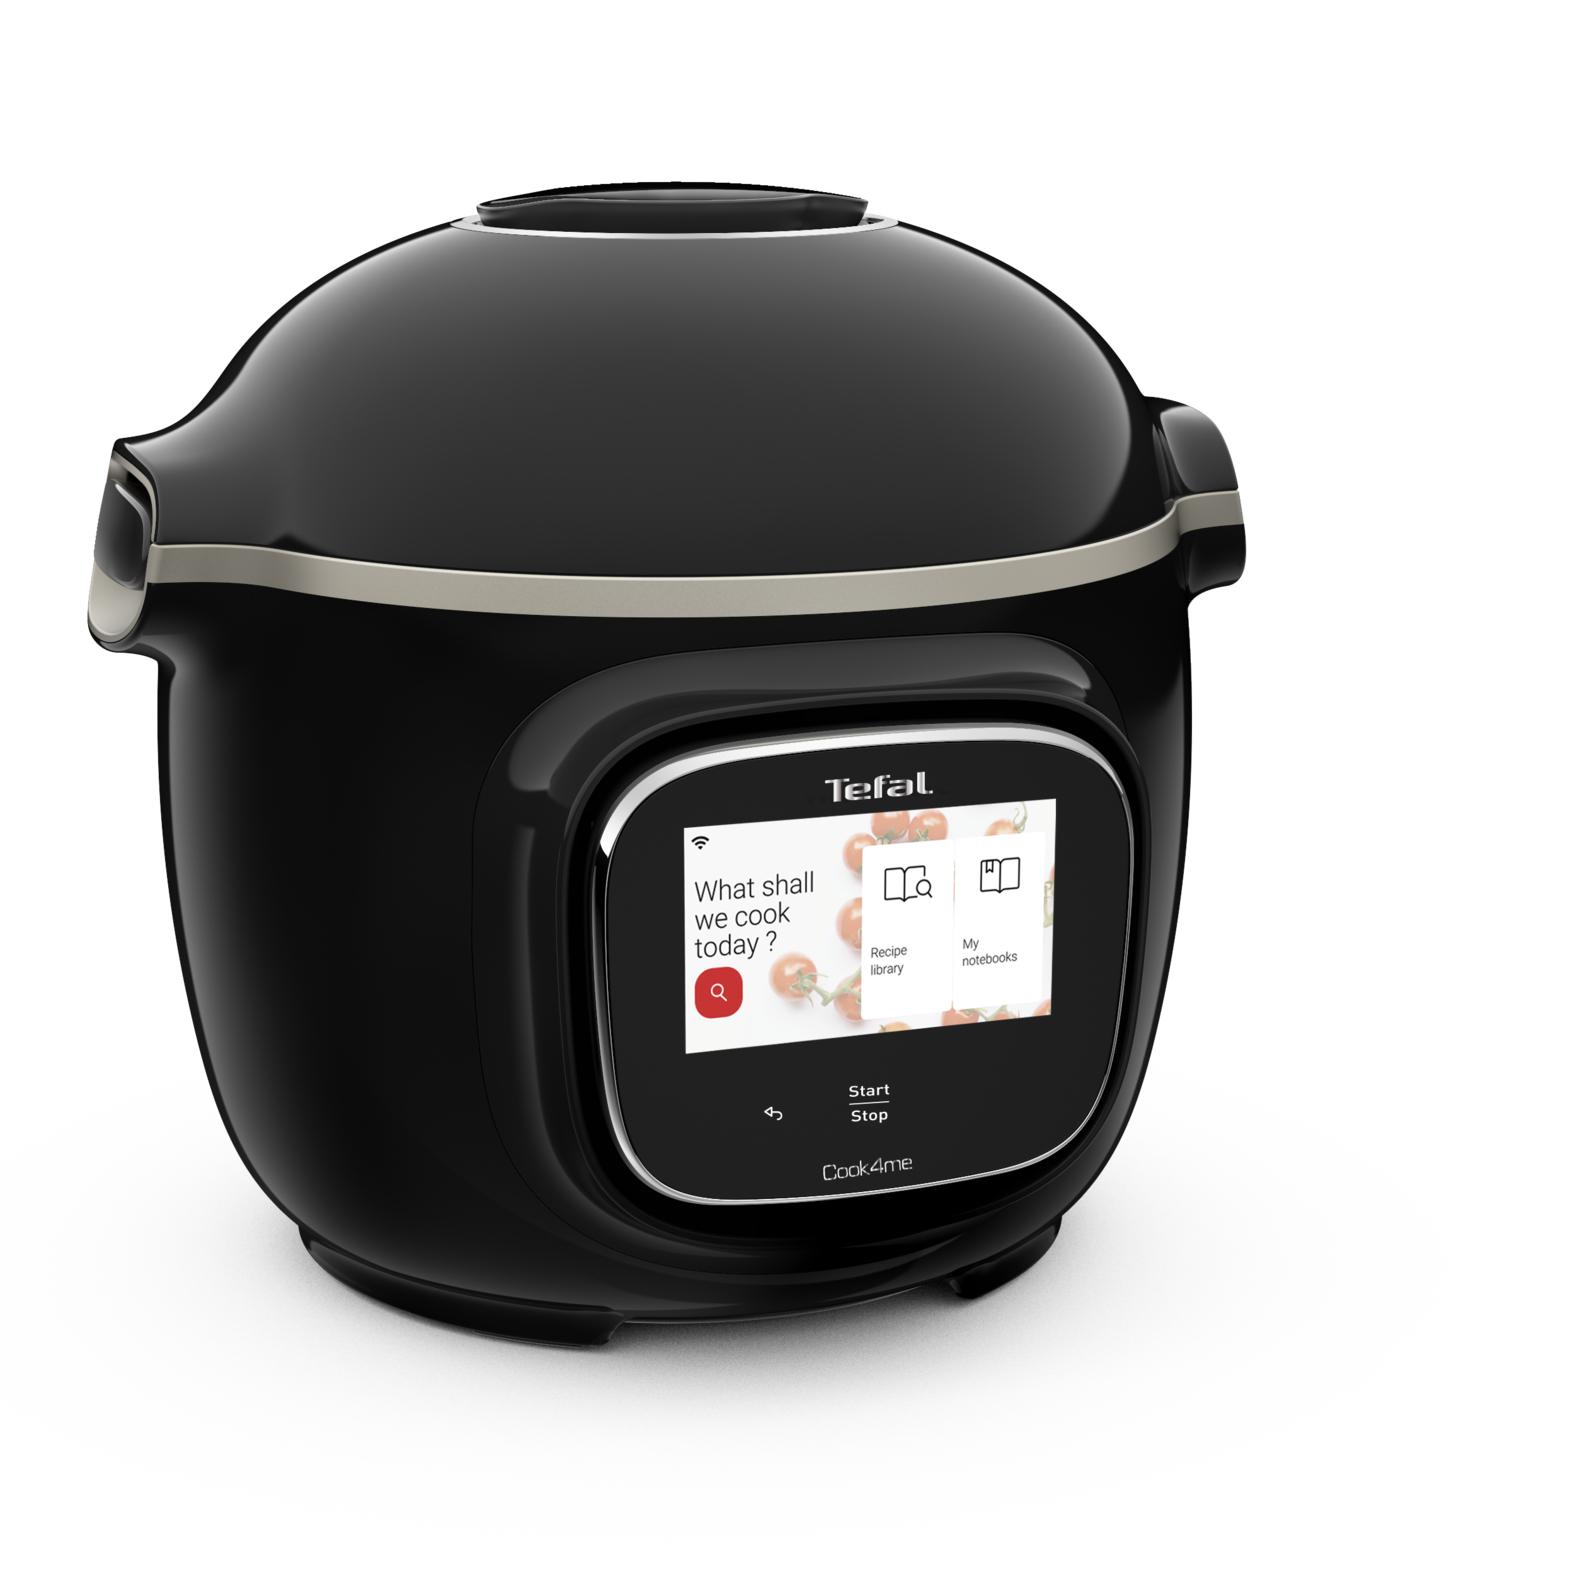 TEFAL Cook4me Touch CY912840 Smart Multicooker - Black, Black